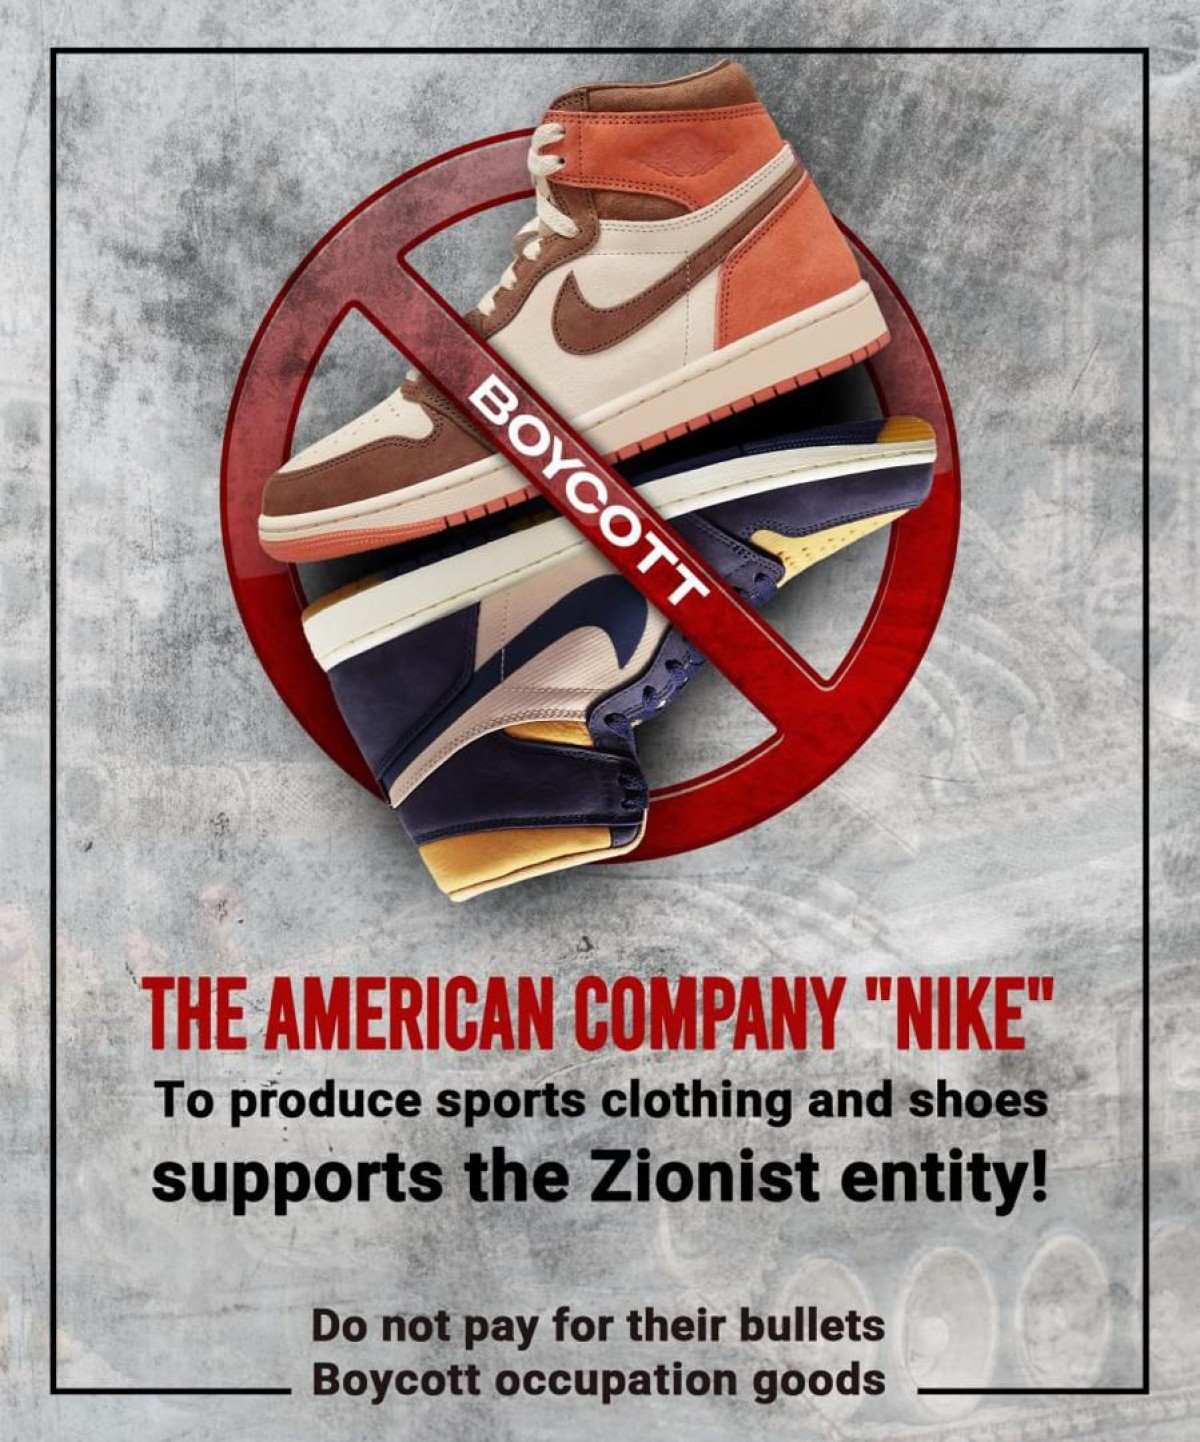 THE AMERICAN COMPANY "NIKE" To produce sports clothing and shoes supports the Zionist entity!